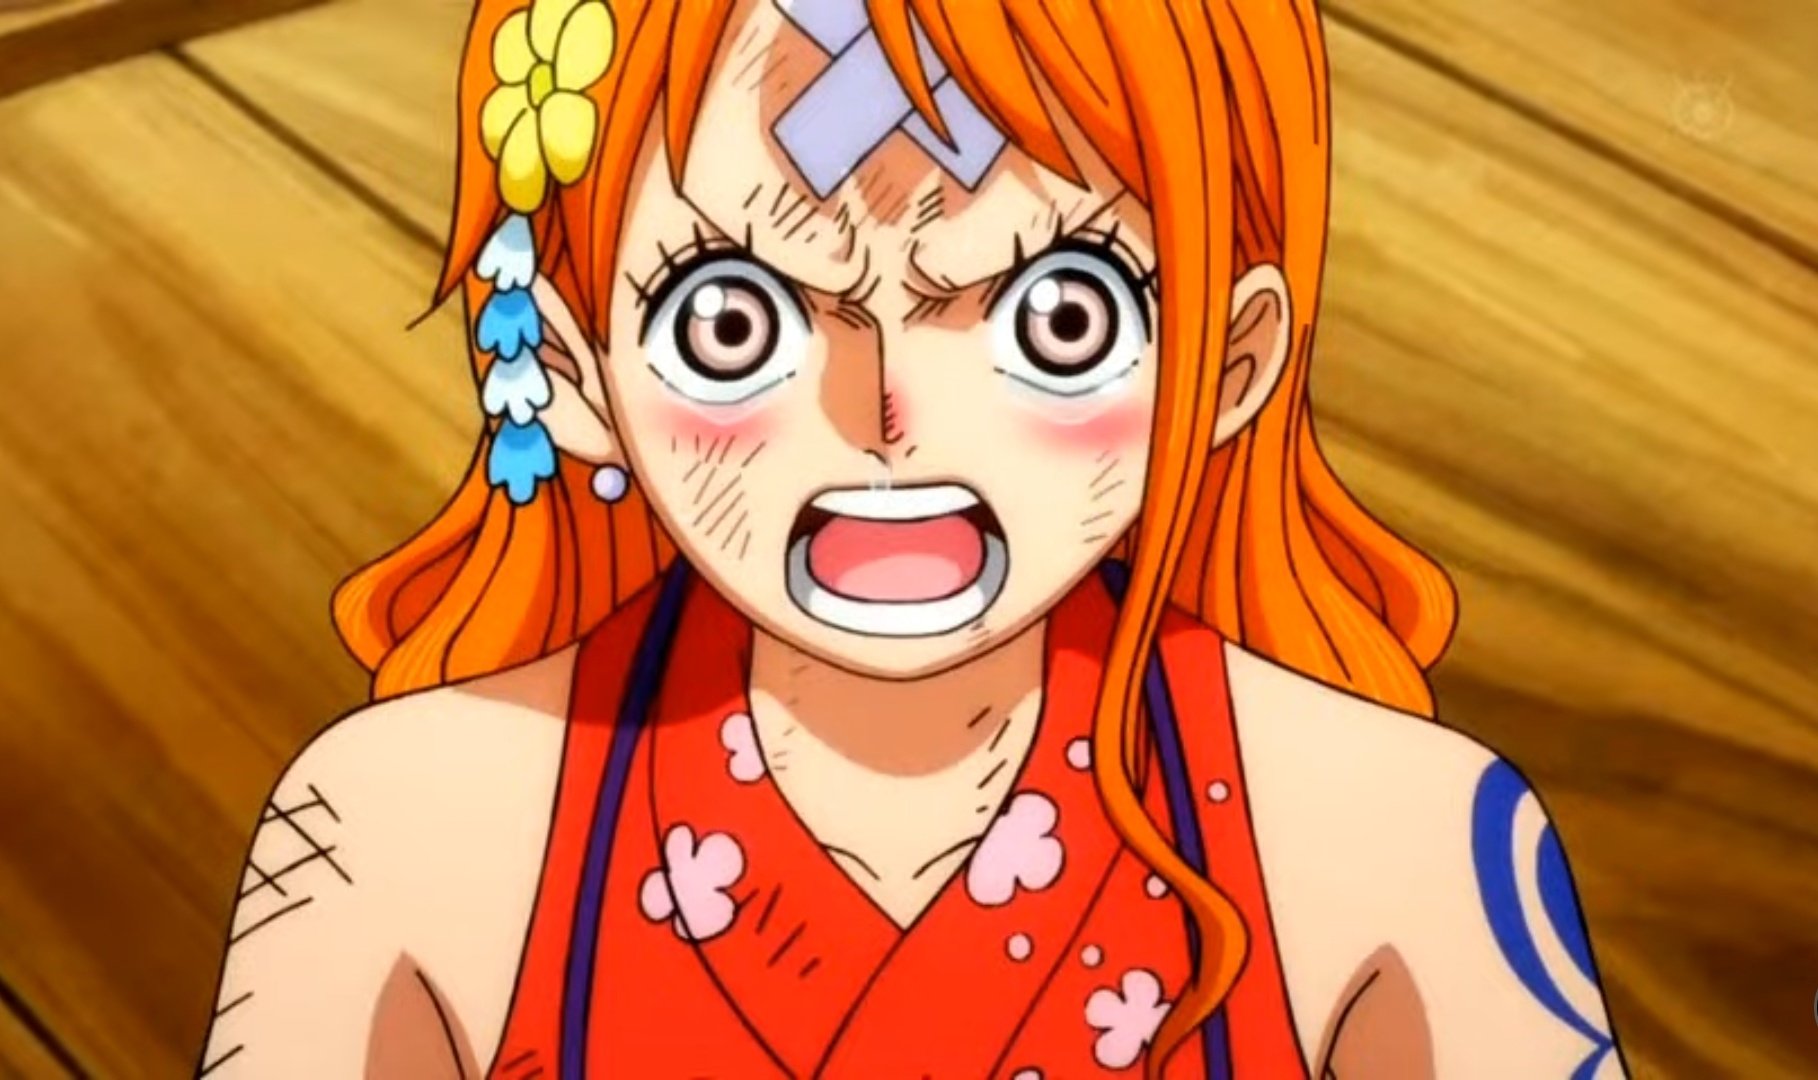 Nami Cries After Luffy's Death - One Piece 1070 (Eng Sub) 1080p